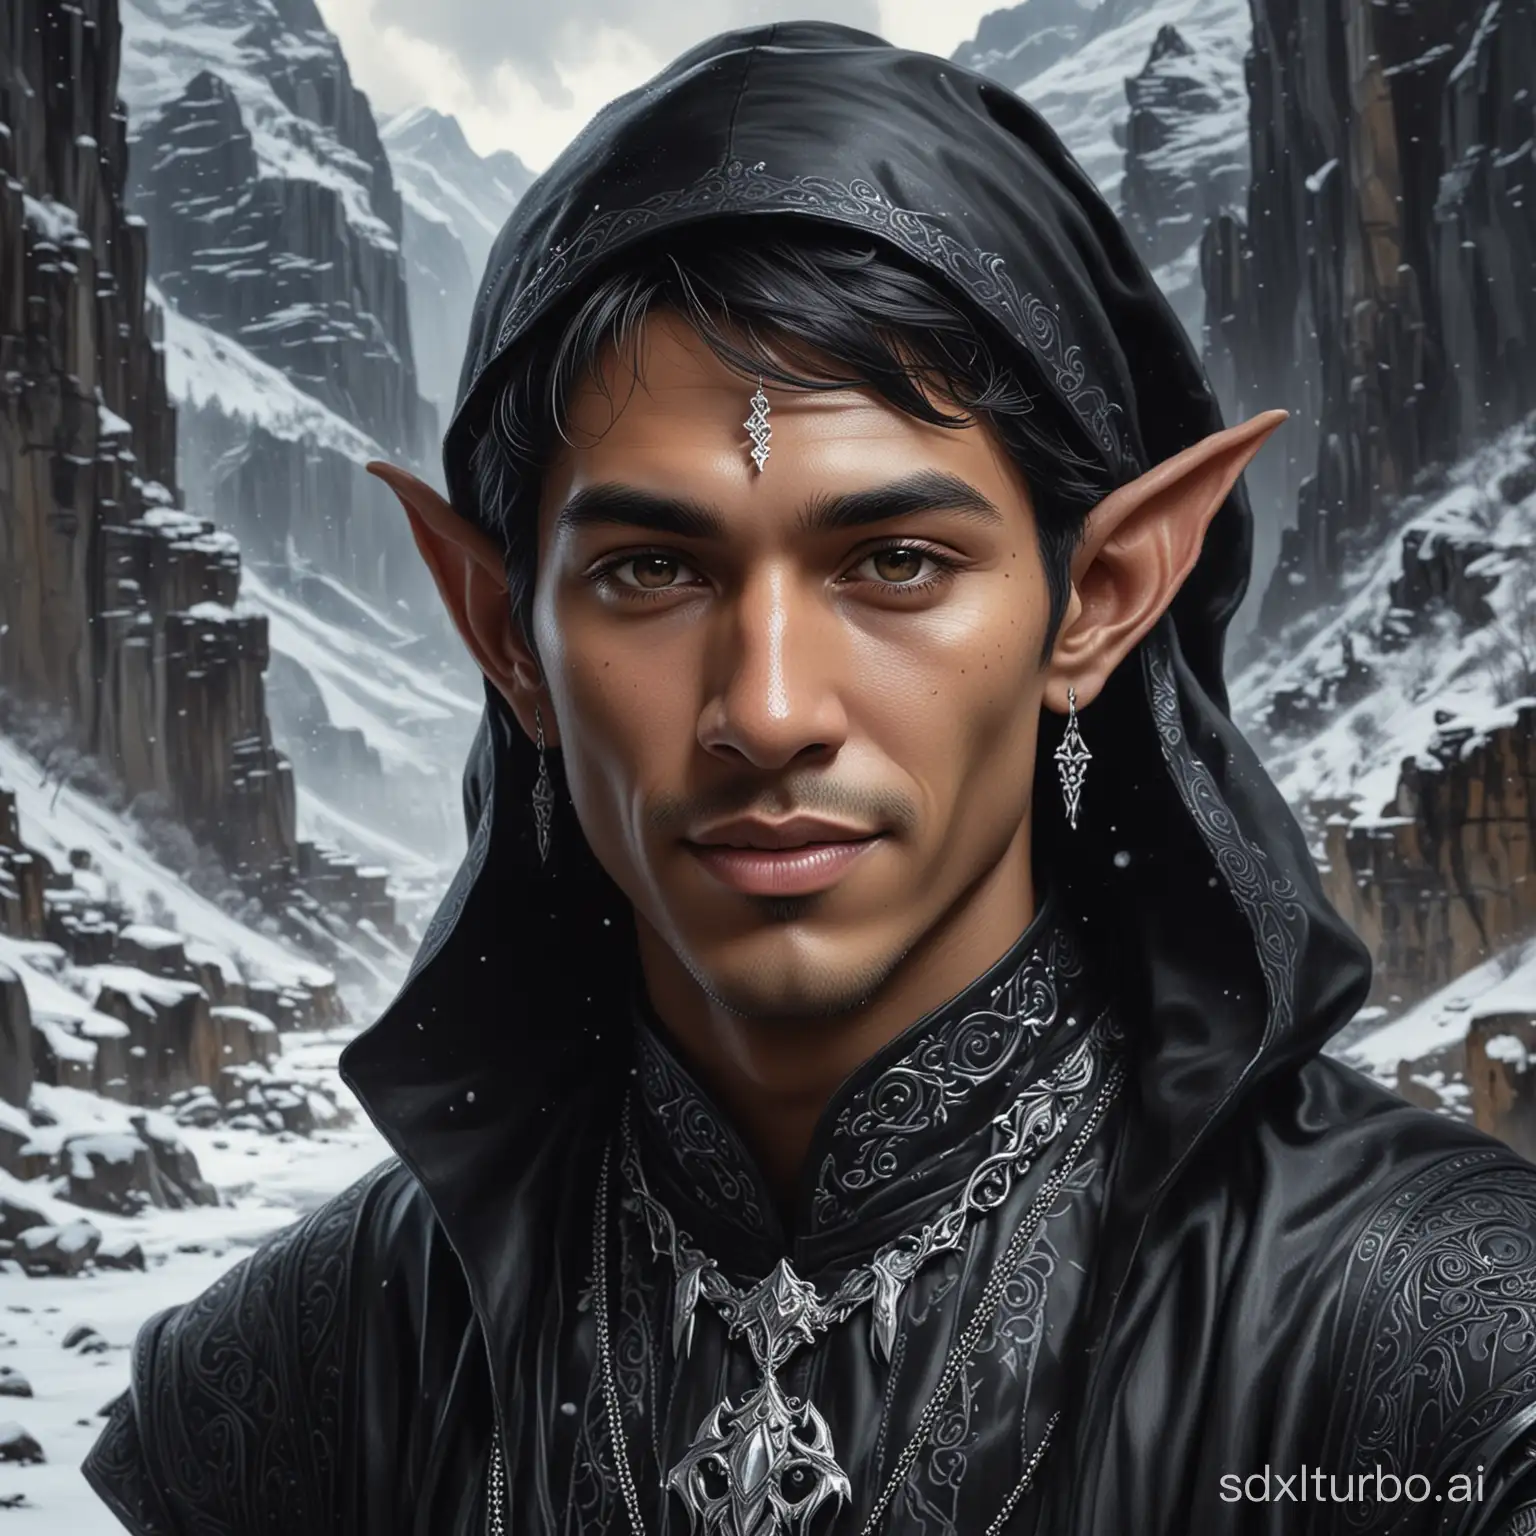 Enigmatic-Indonesian-Elf-Man-in-Snowy-Canyon-Airbrush-Oil-Portrait